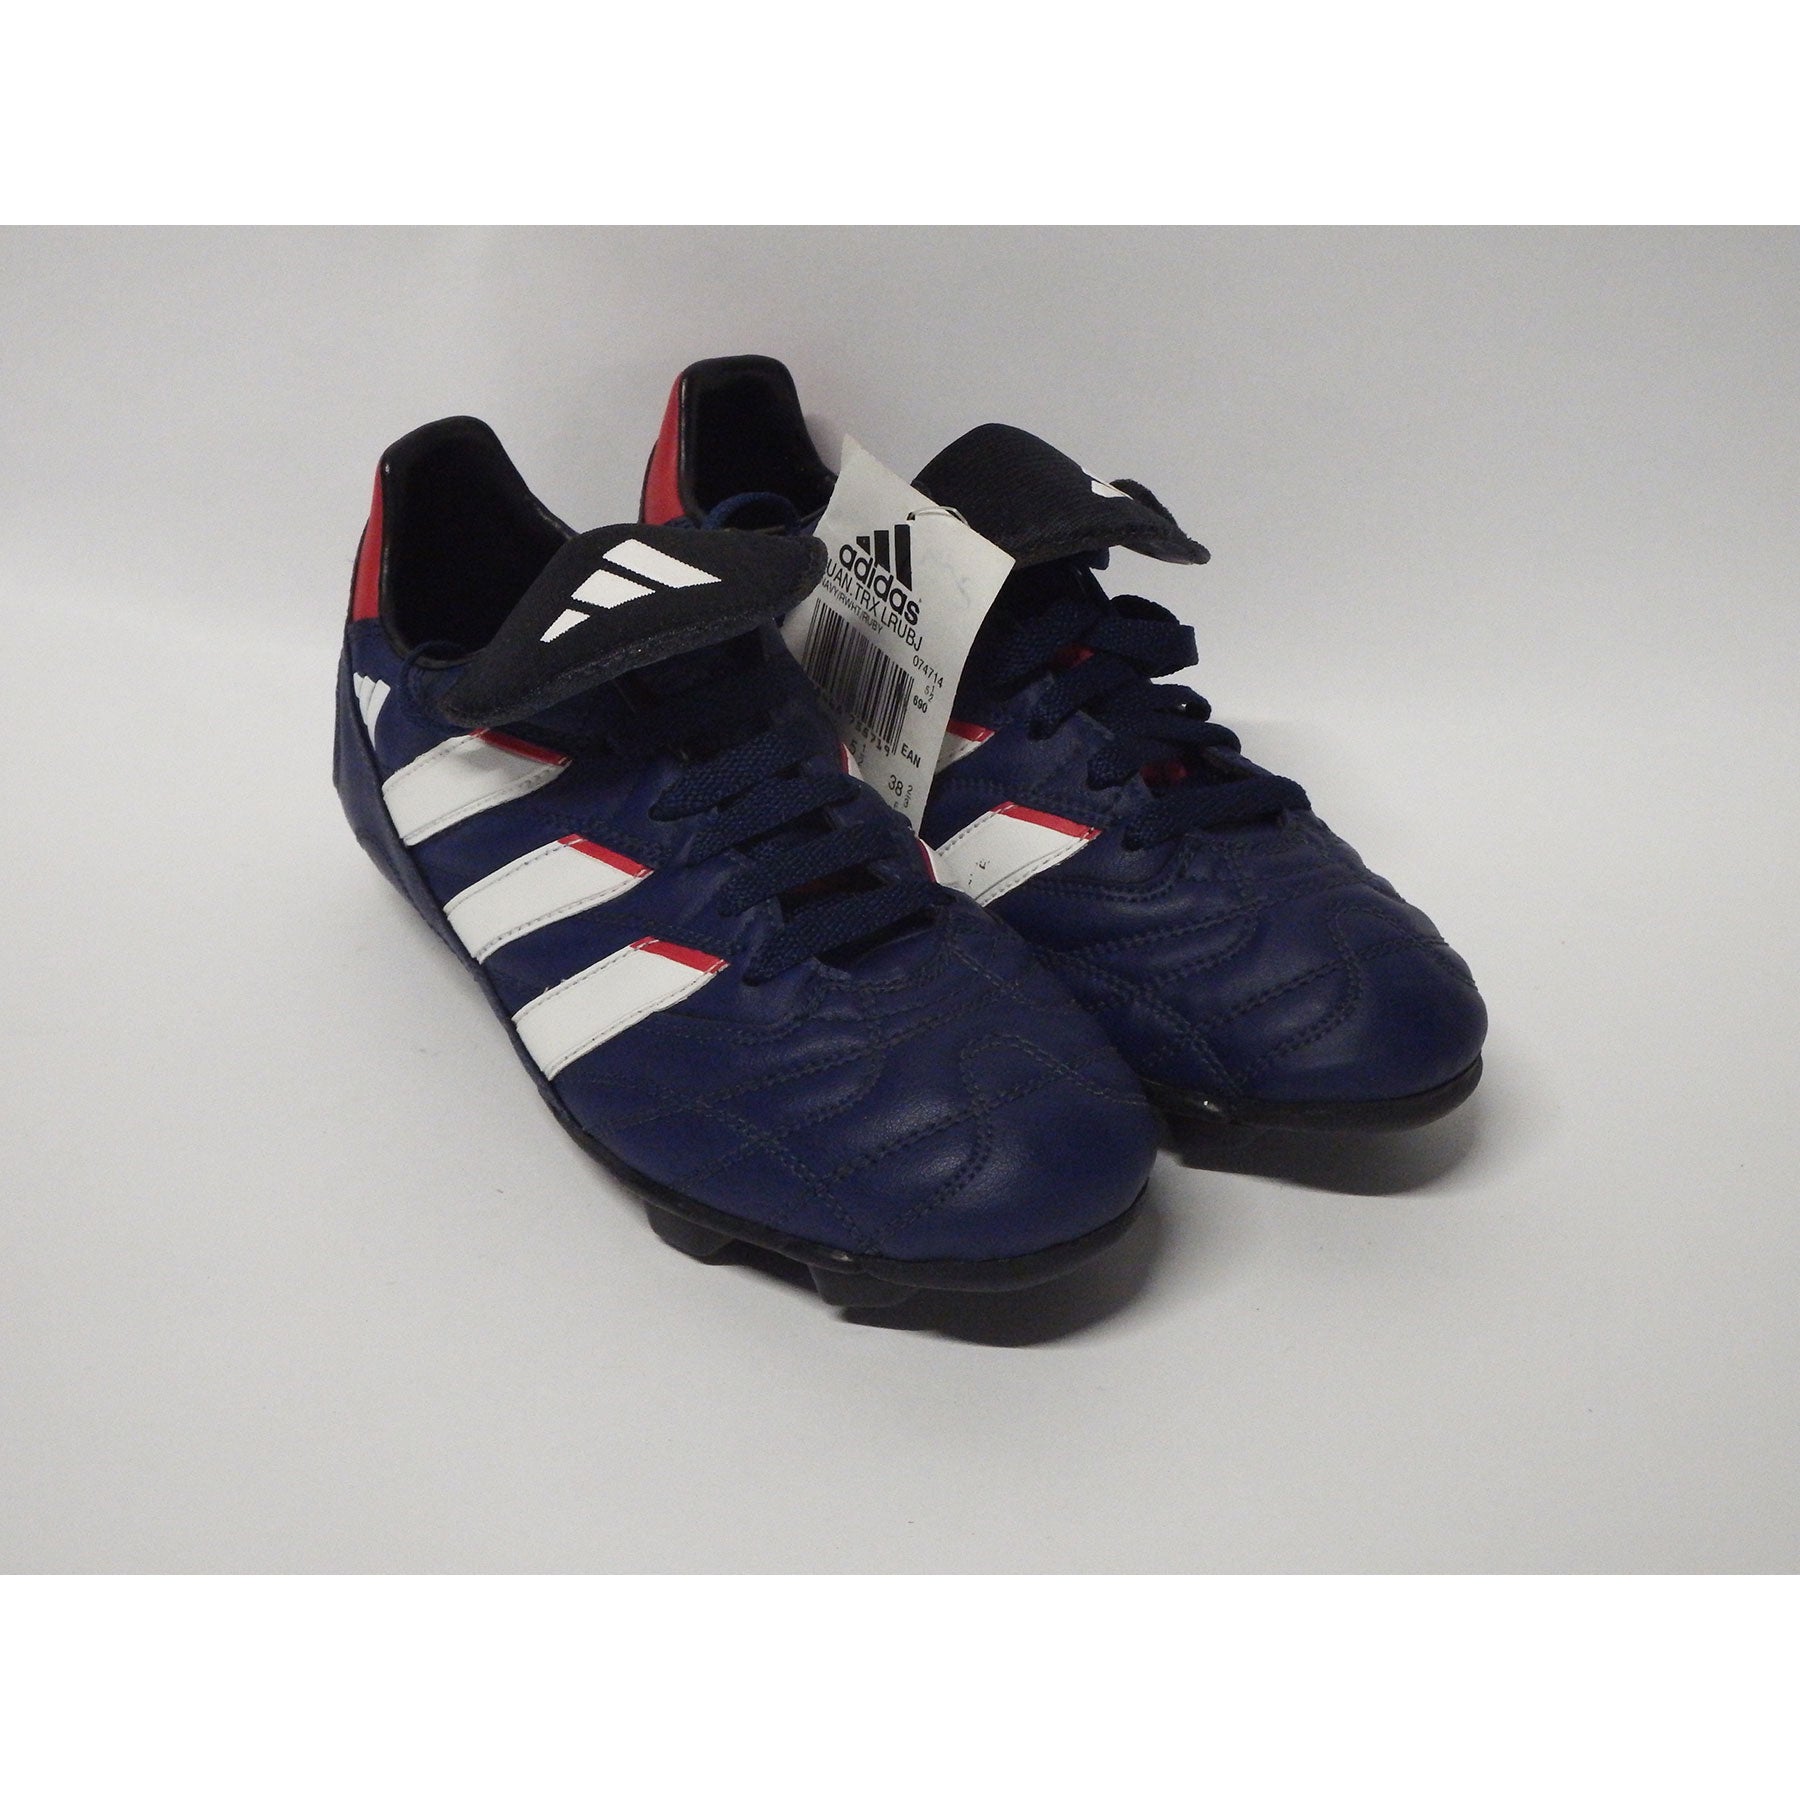 adidas boots size 5